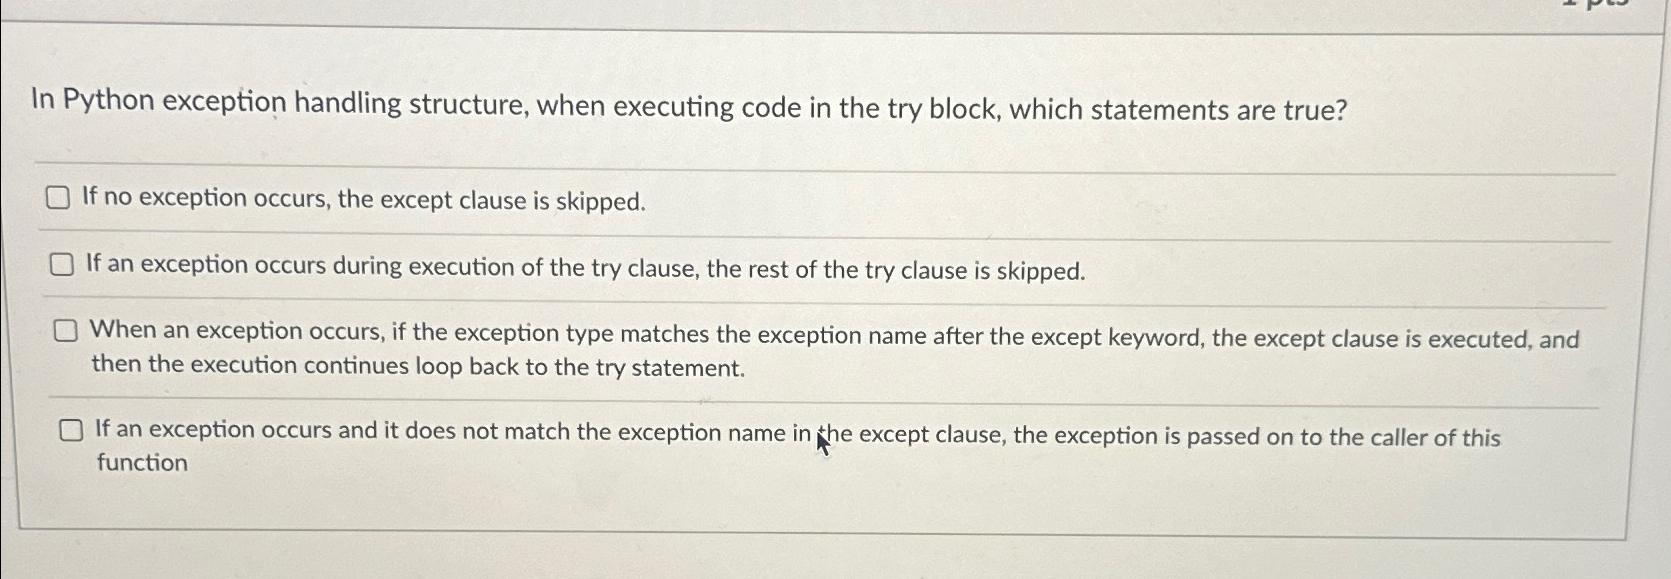 In Python exception handling structure, when executing code in the try block, which statements are true? If